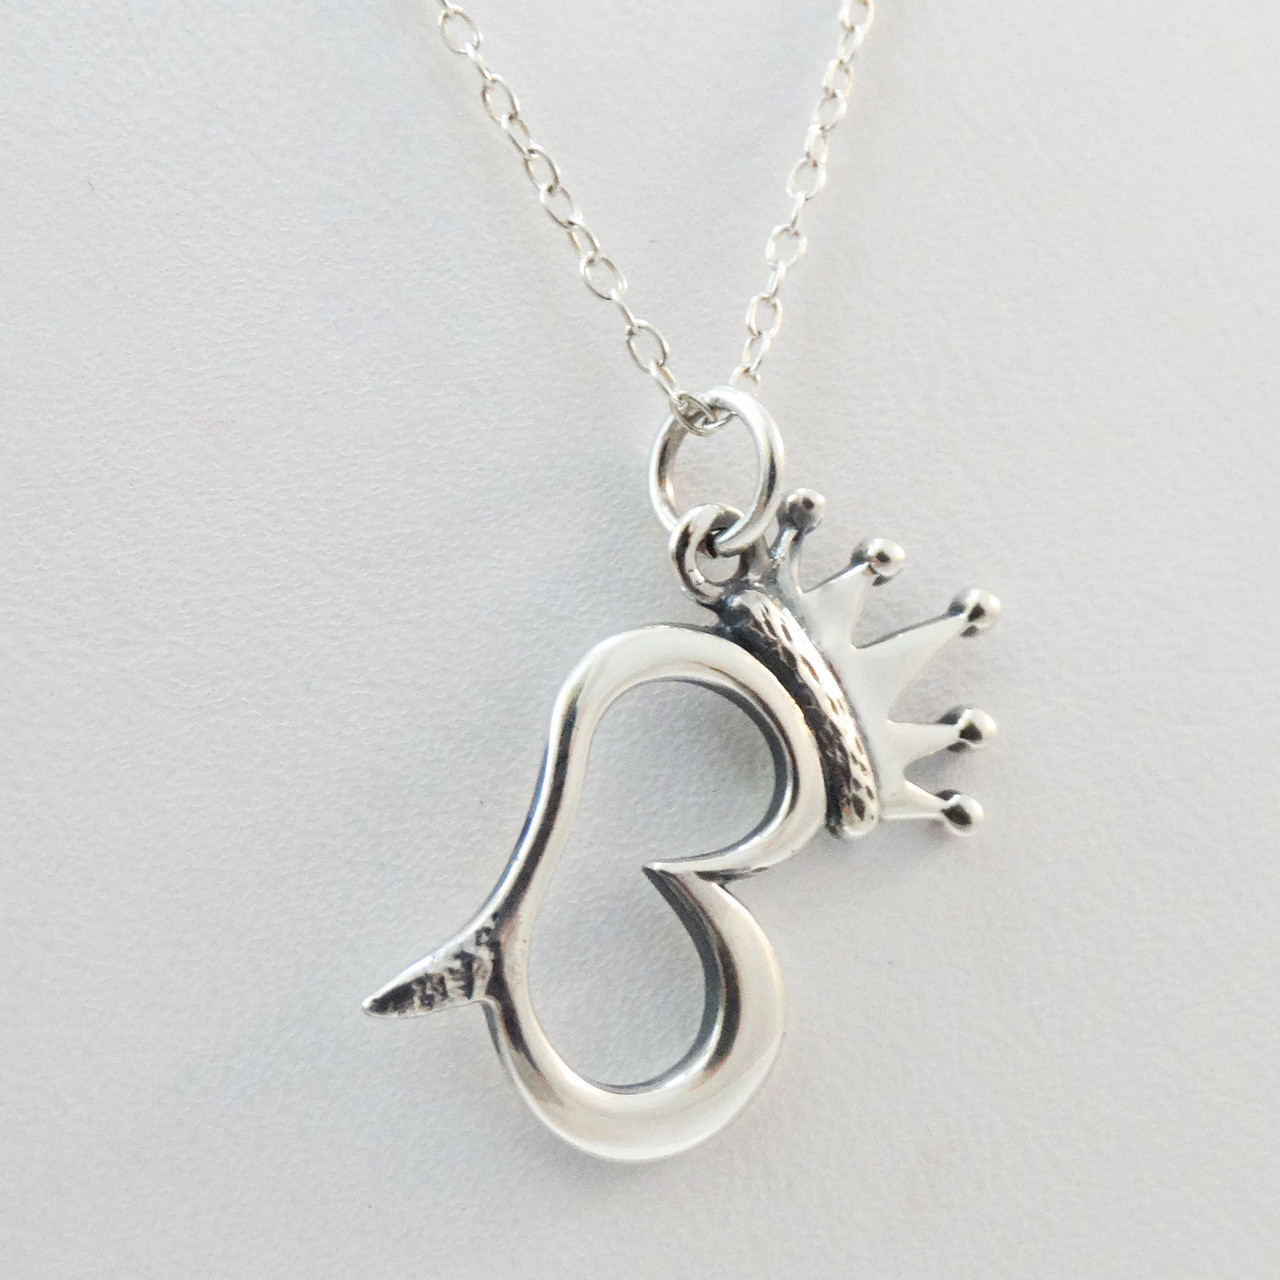 Queen Bee Necklace in 925 Sterling Silver